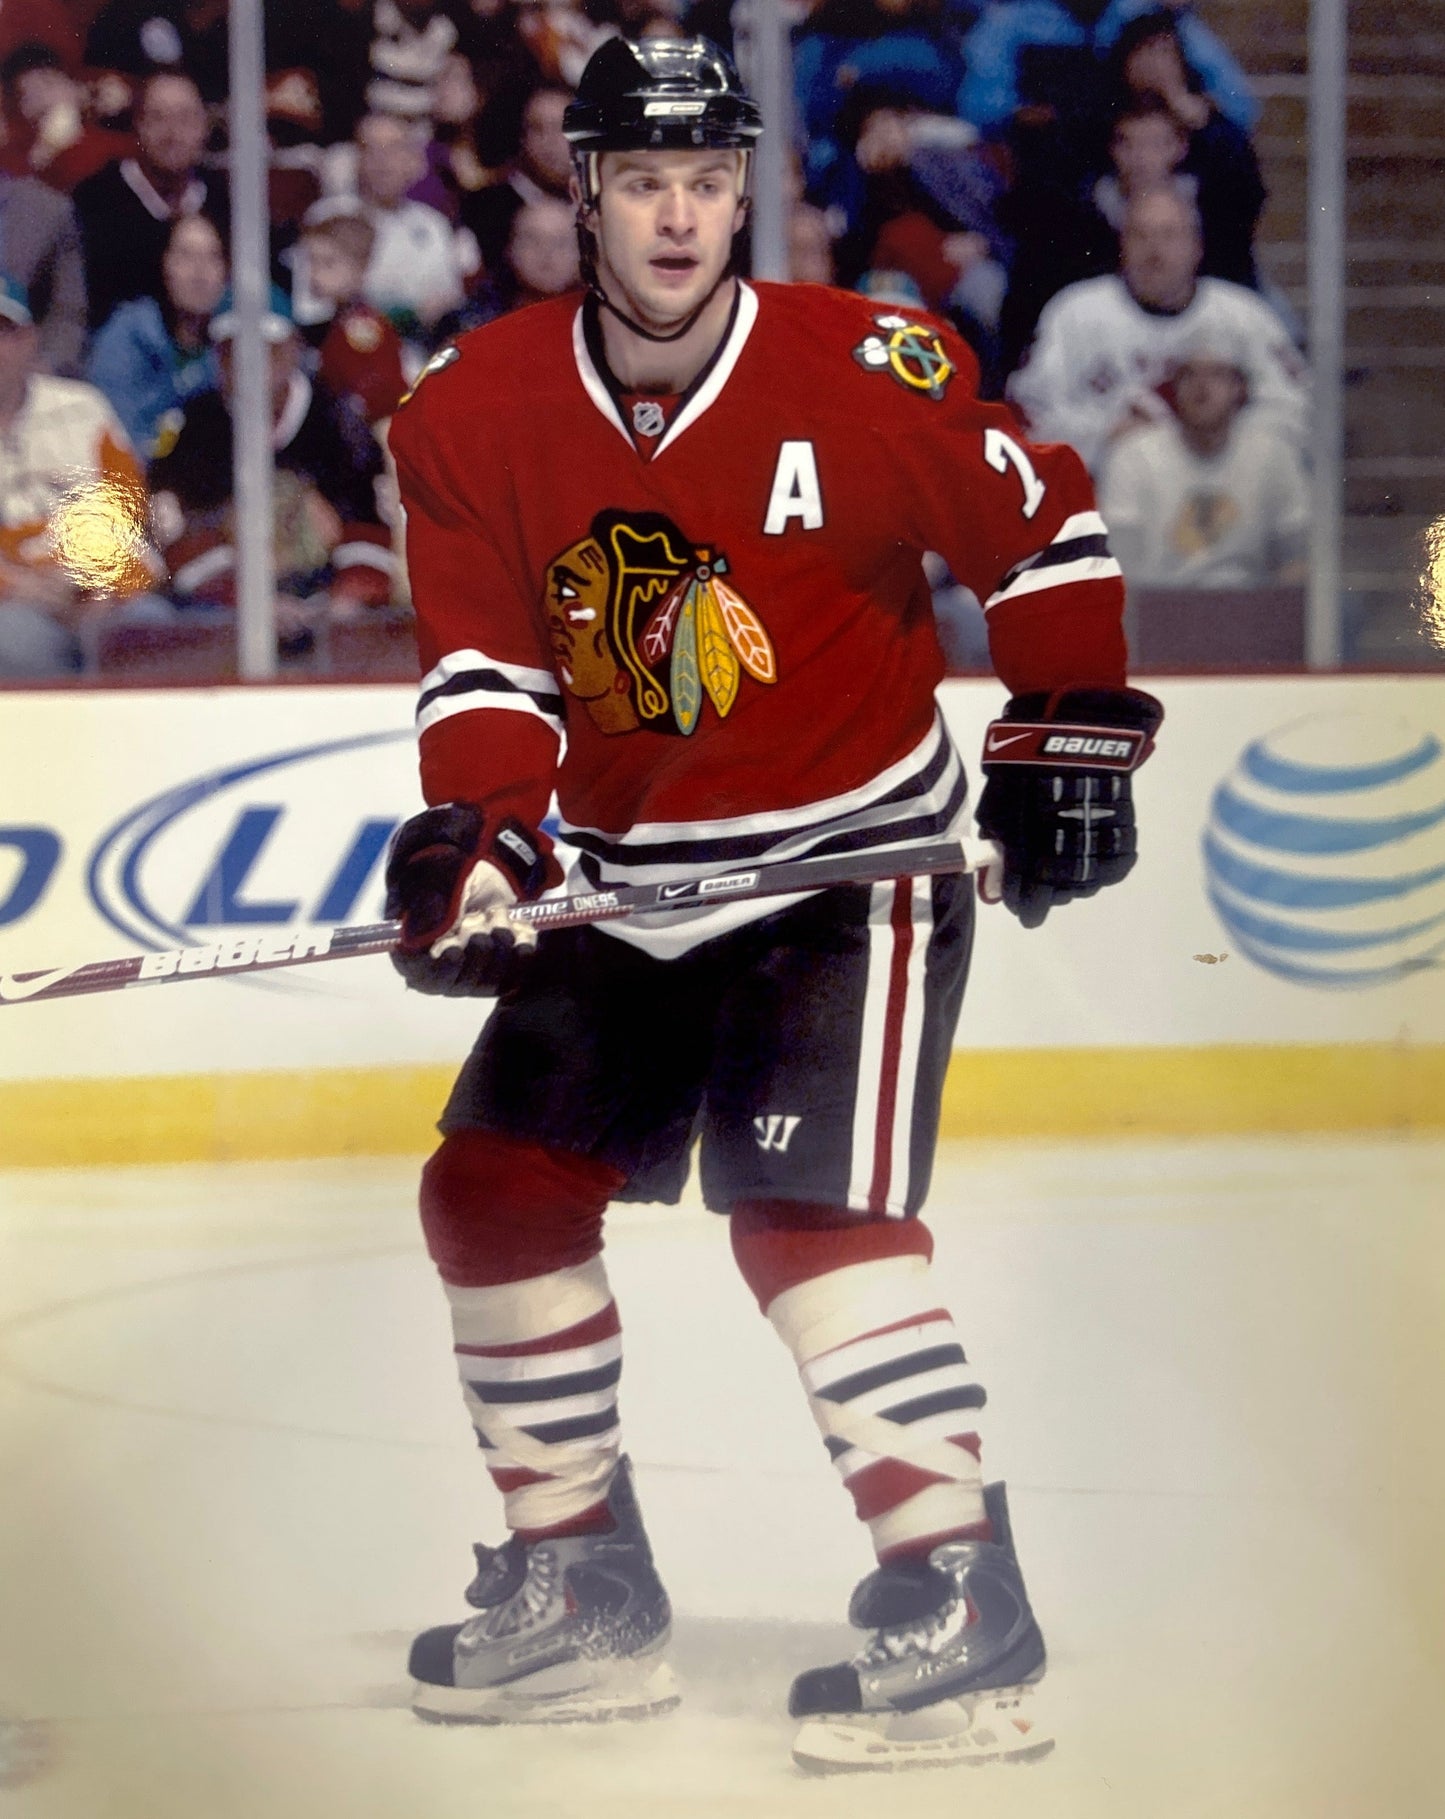 Brent Seabrook "A" Patch Chicago Blackhawks Action Photo (8X10)